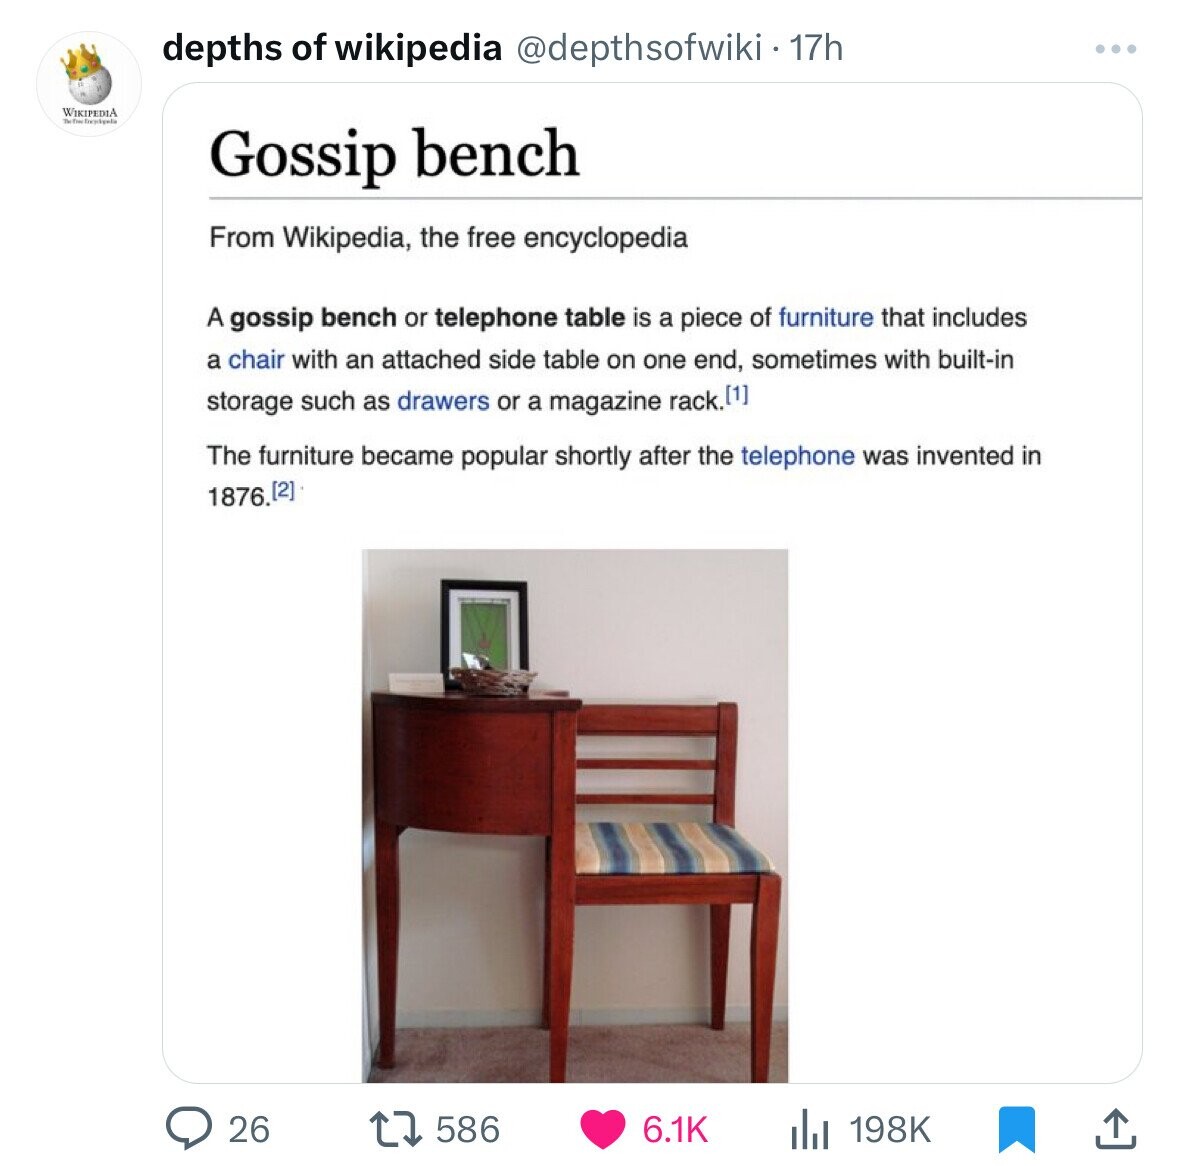 shelf - Wikipedia The Tow cykel depths of wikipedia . 17h Gossip bench From Wikipedia, the free encyclopedia A gossip bench or telephone table is a piece of furniture that includes a chair with an attached side table on one end, sometimes with builtin sto